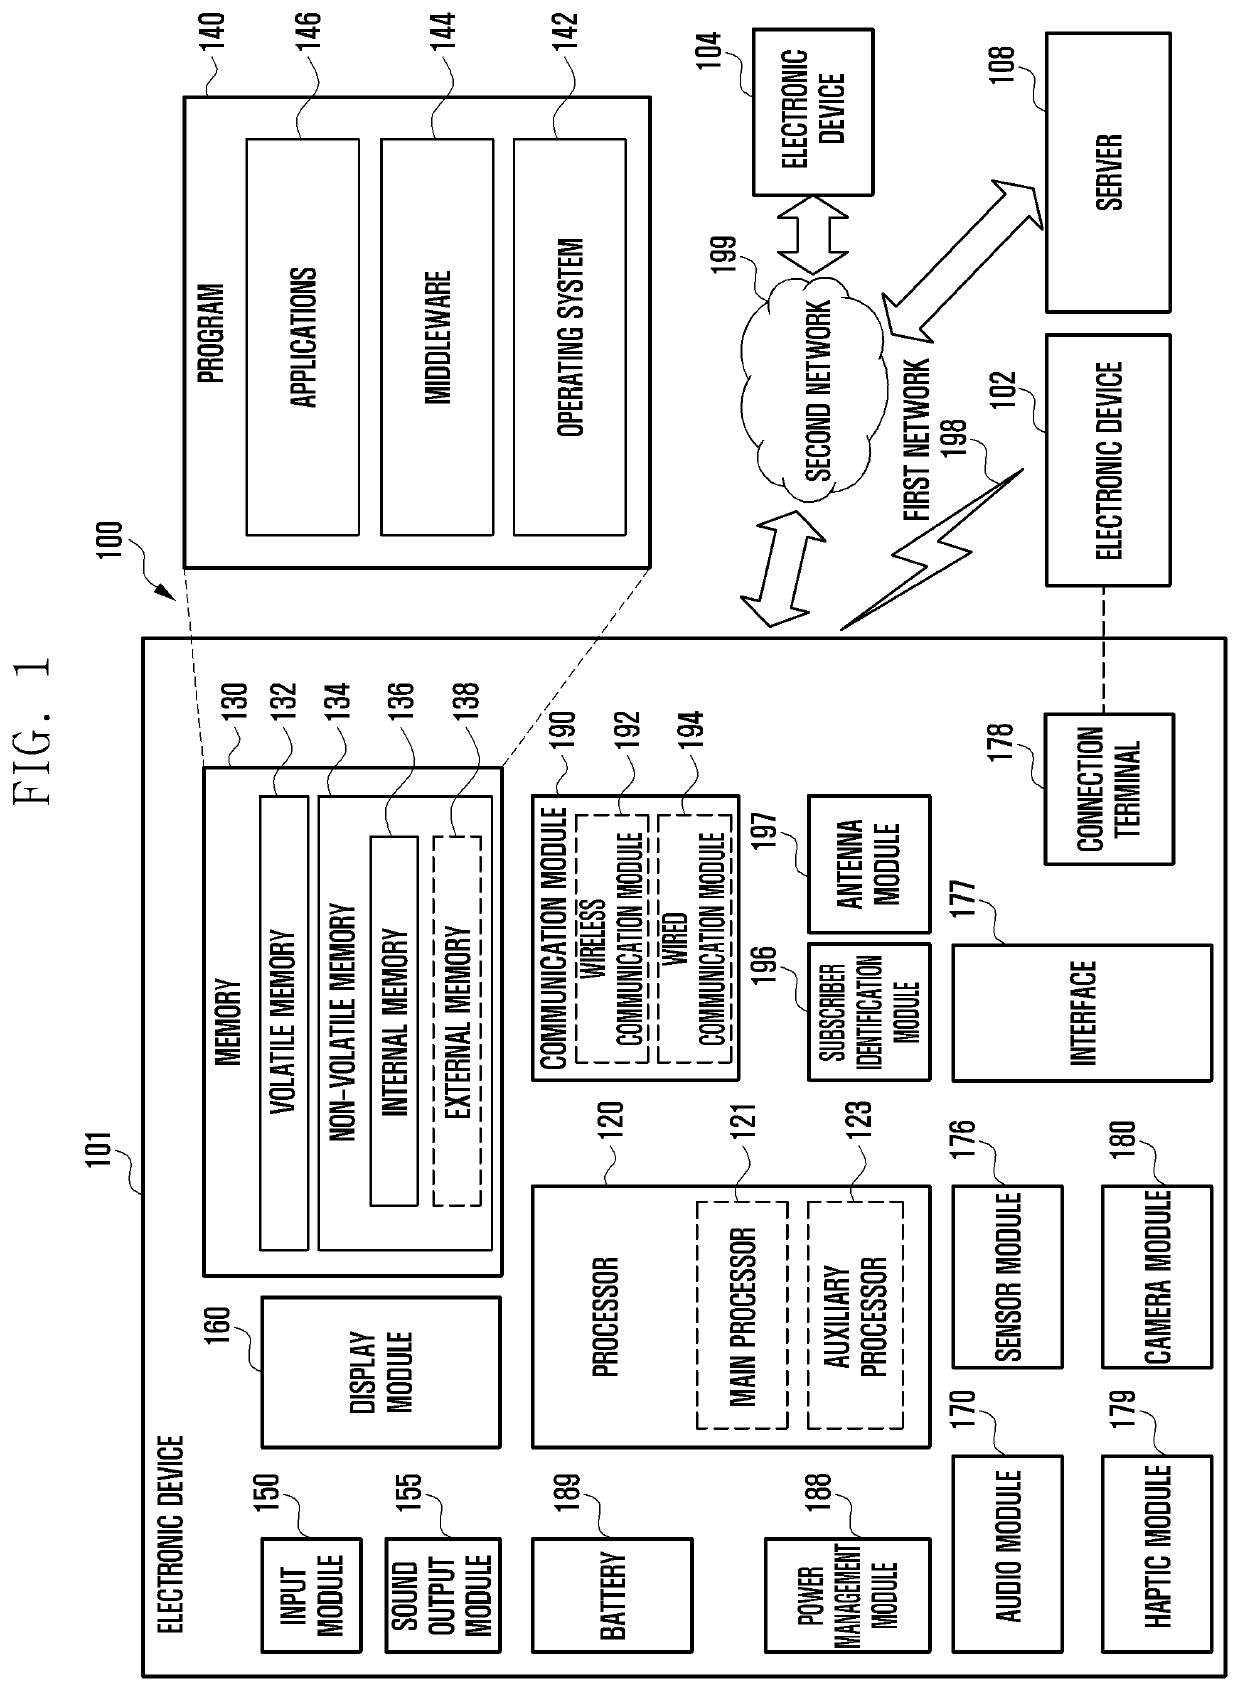 Electronic device and method for updating database based on reserved space